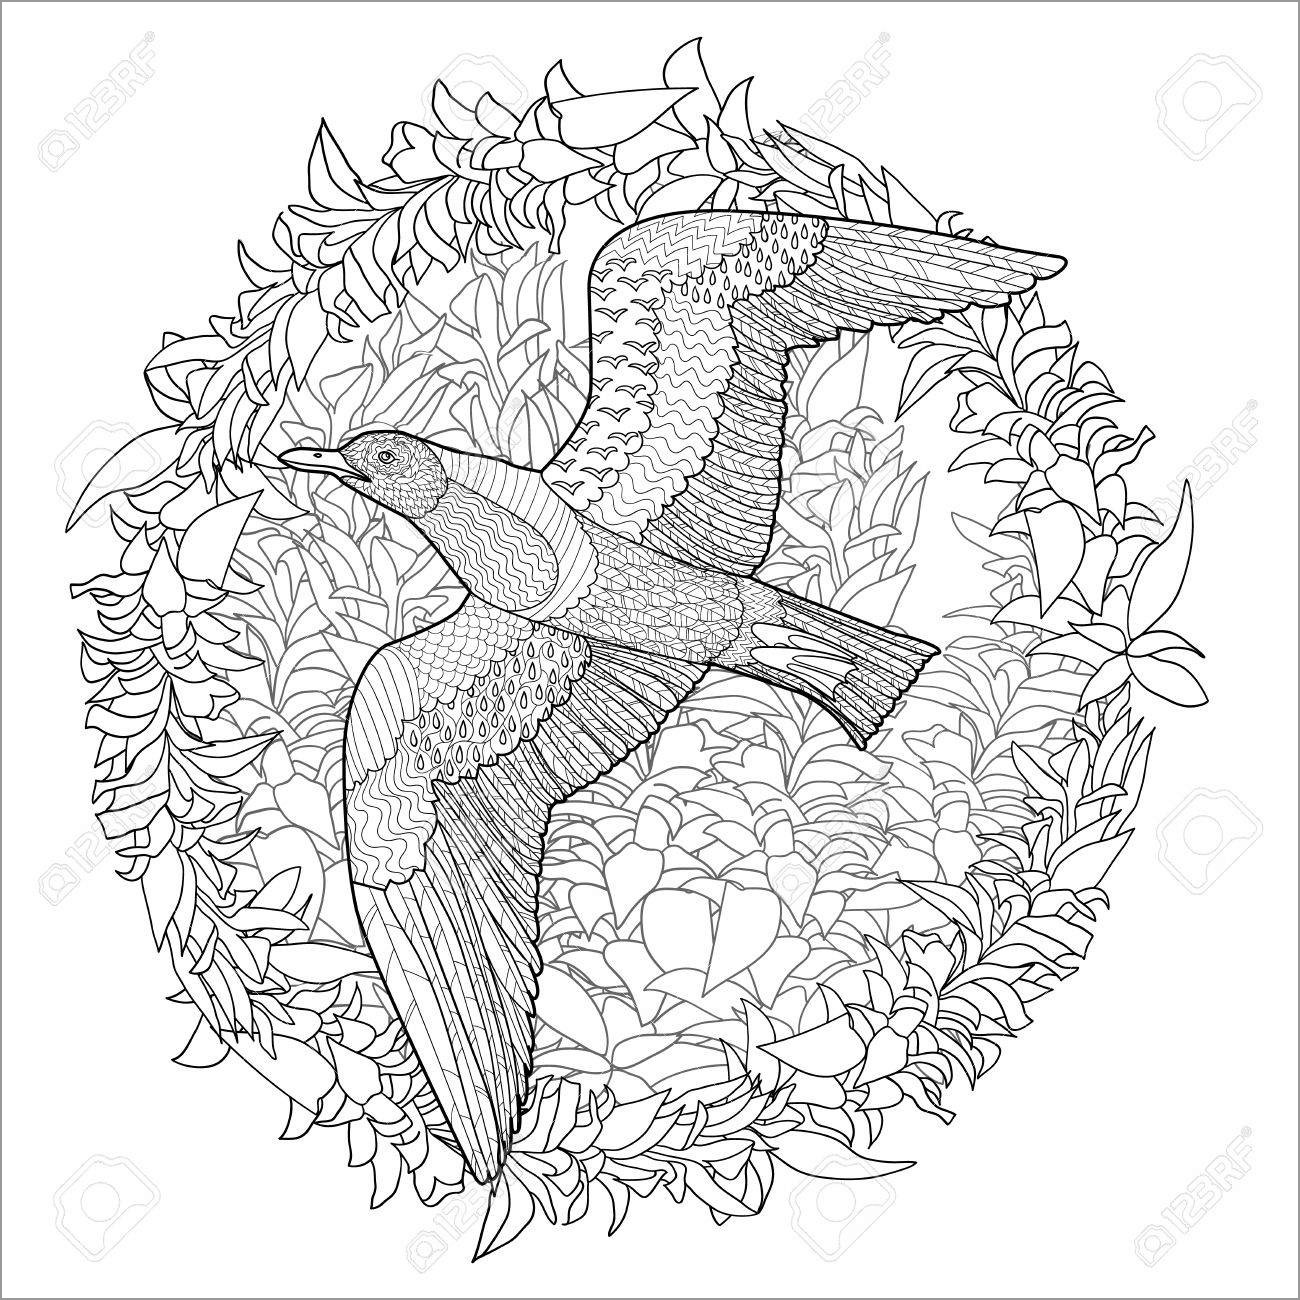 Zentangle Seagulls Coloring Page